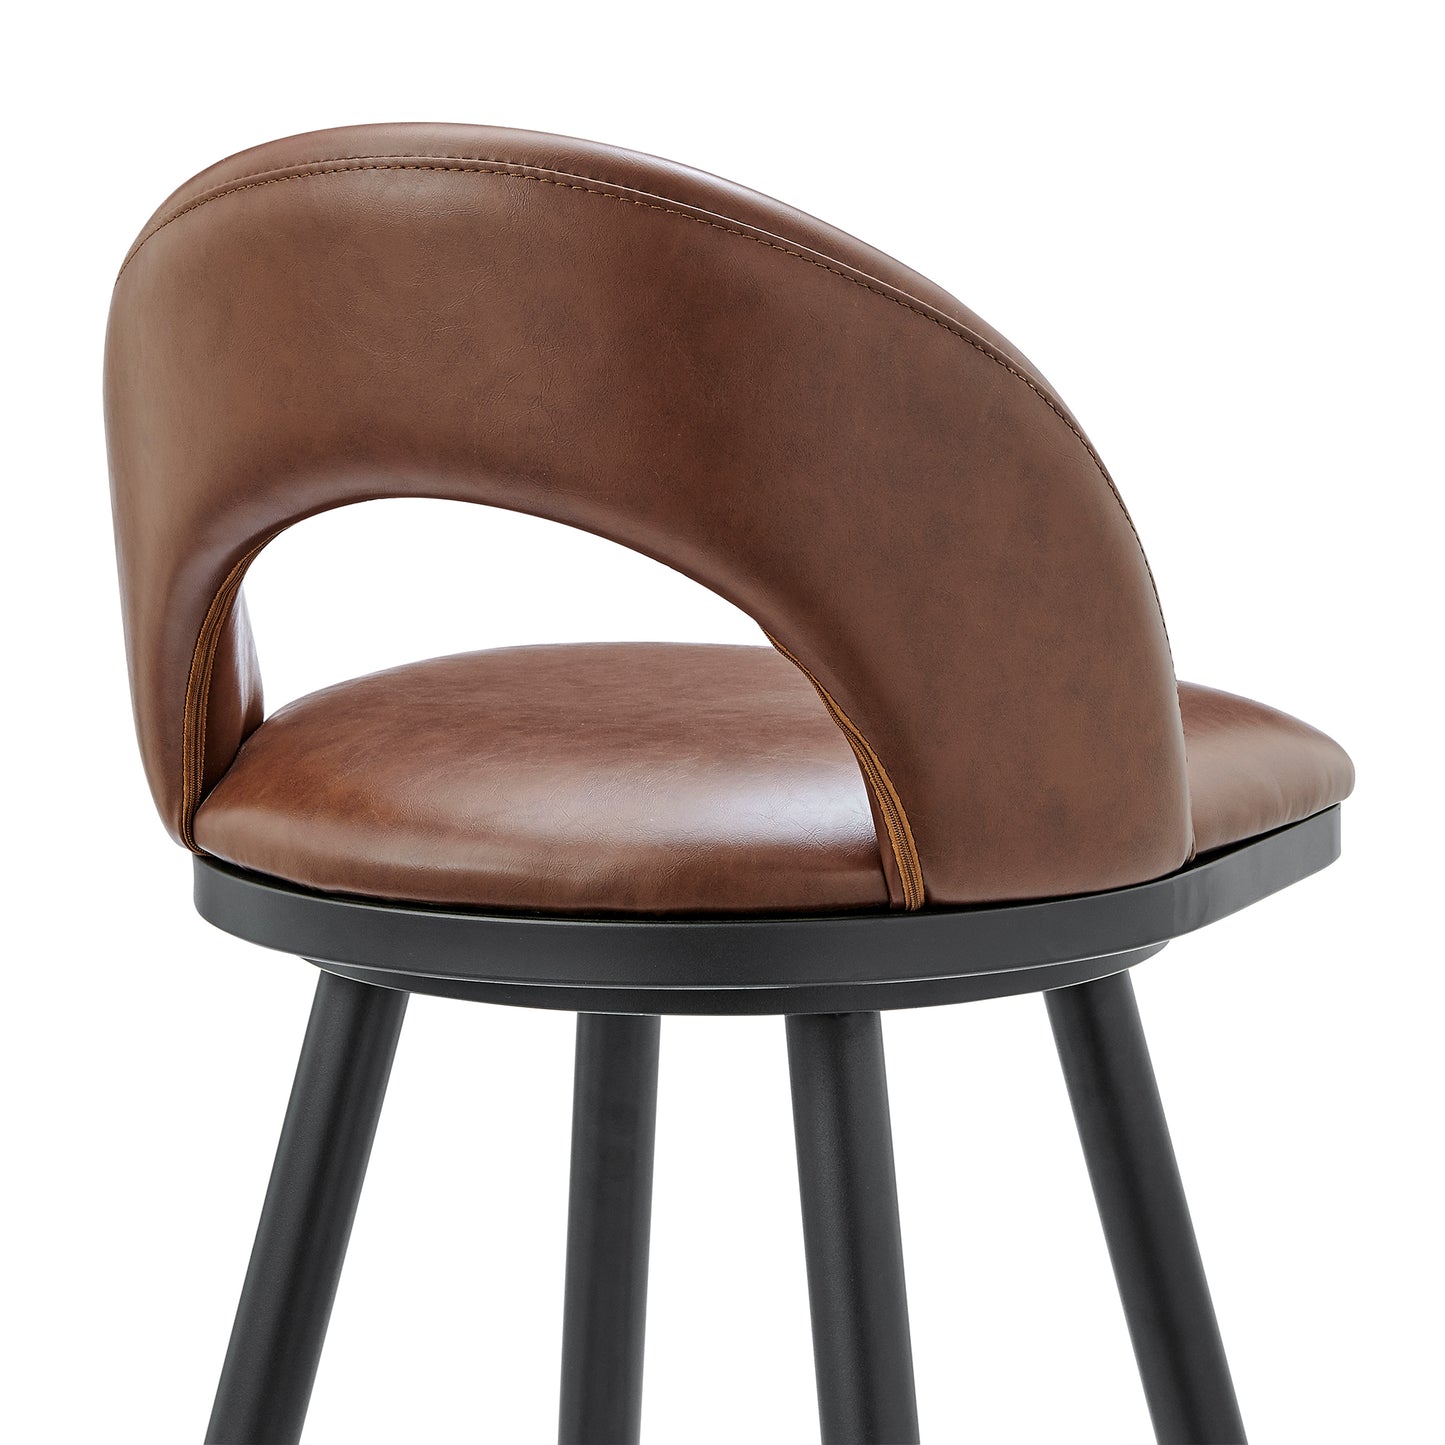 Lottech Swivel Counter Stool in Black Metal and Brown Faux Leather